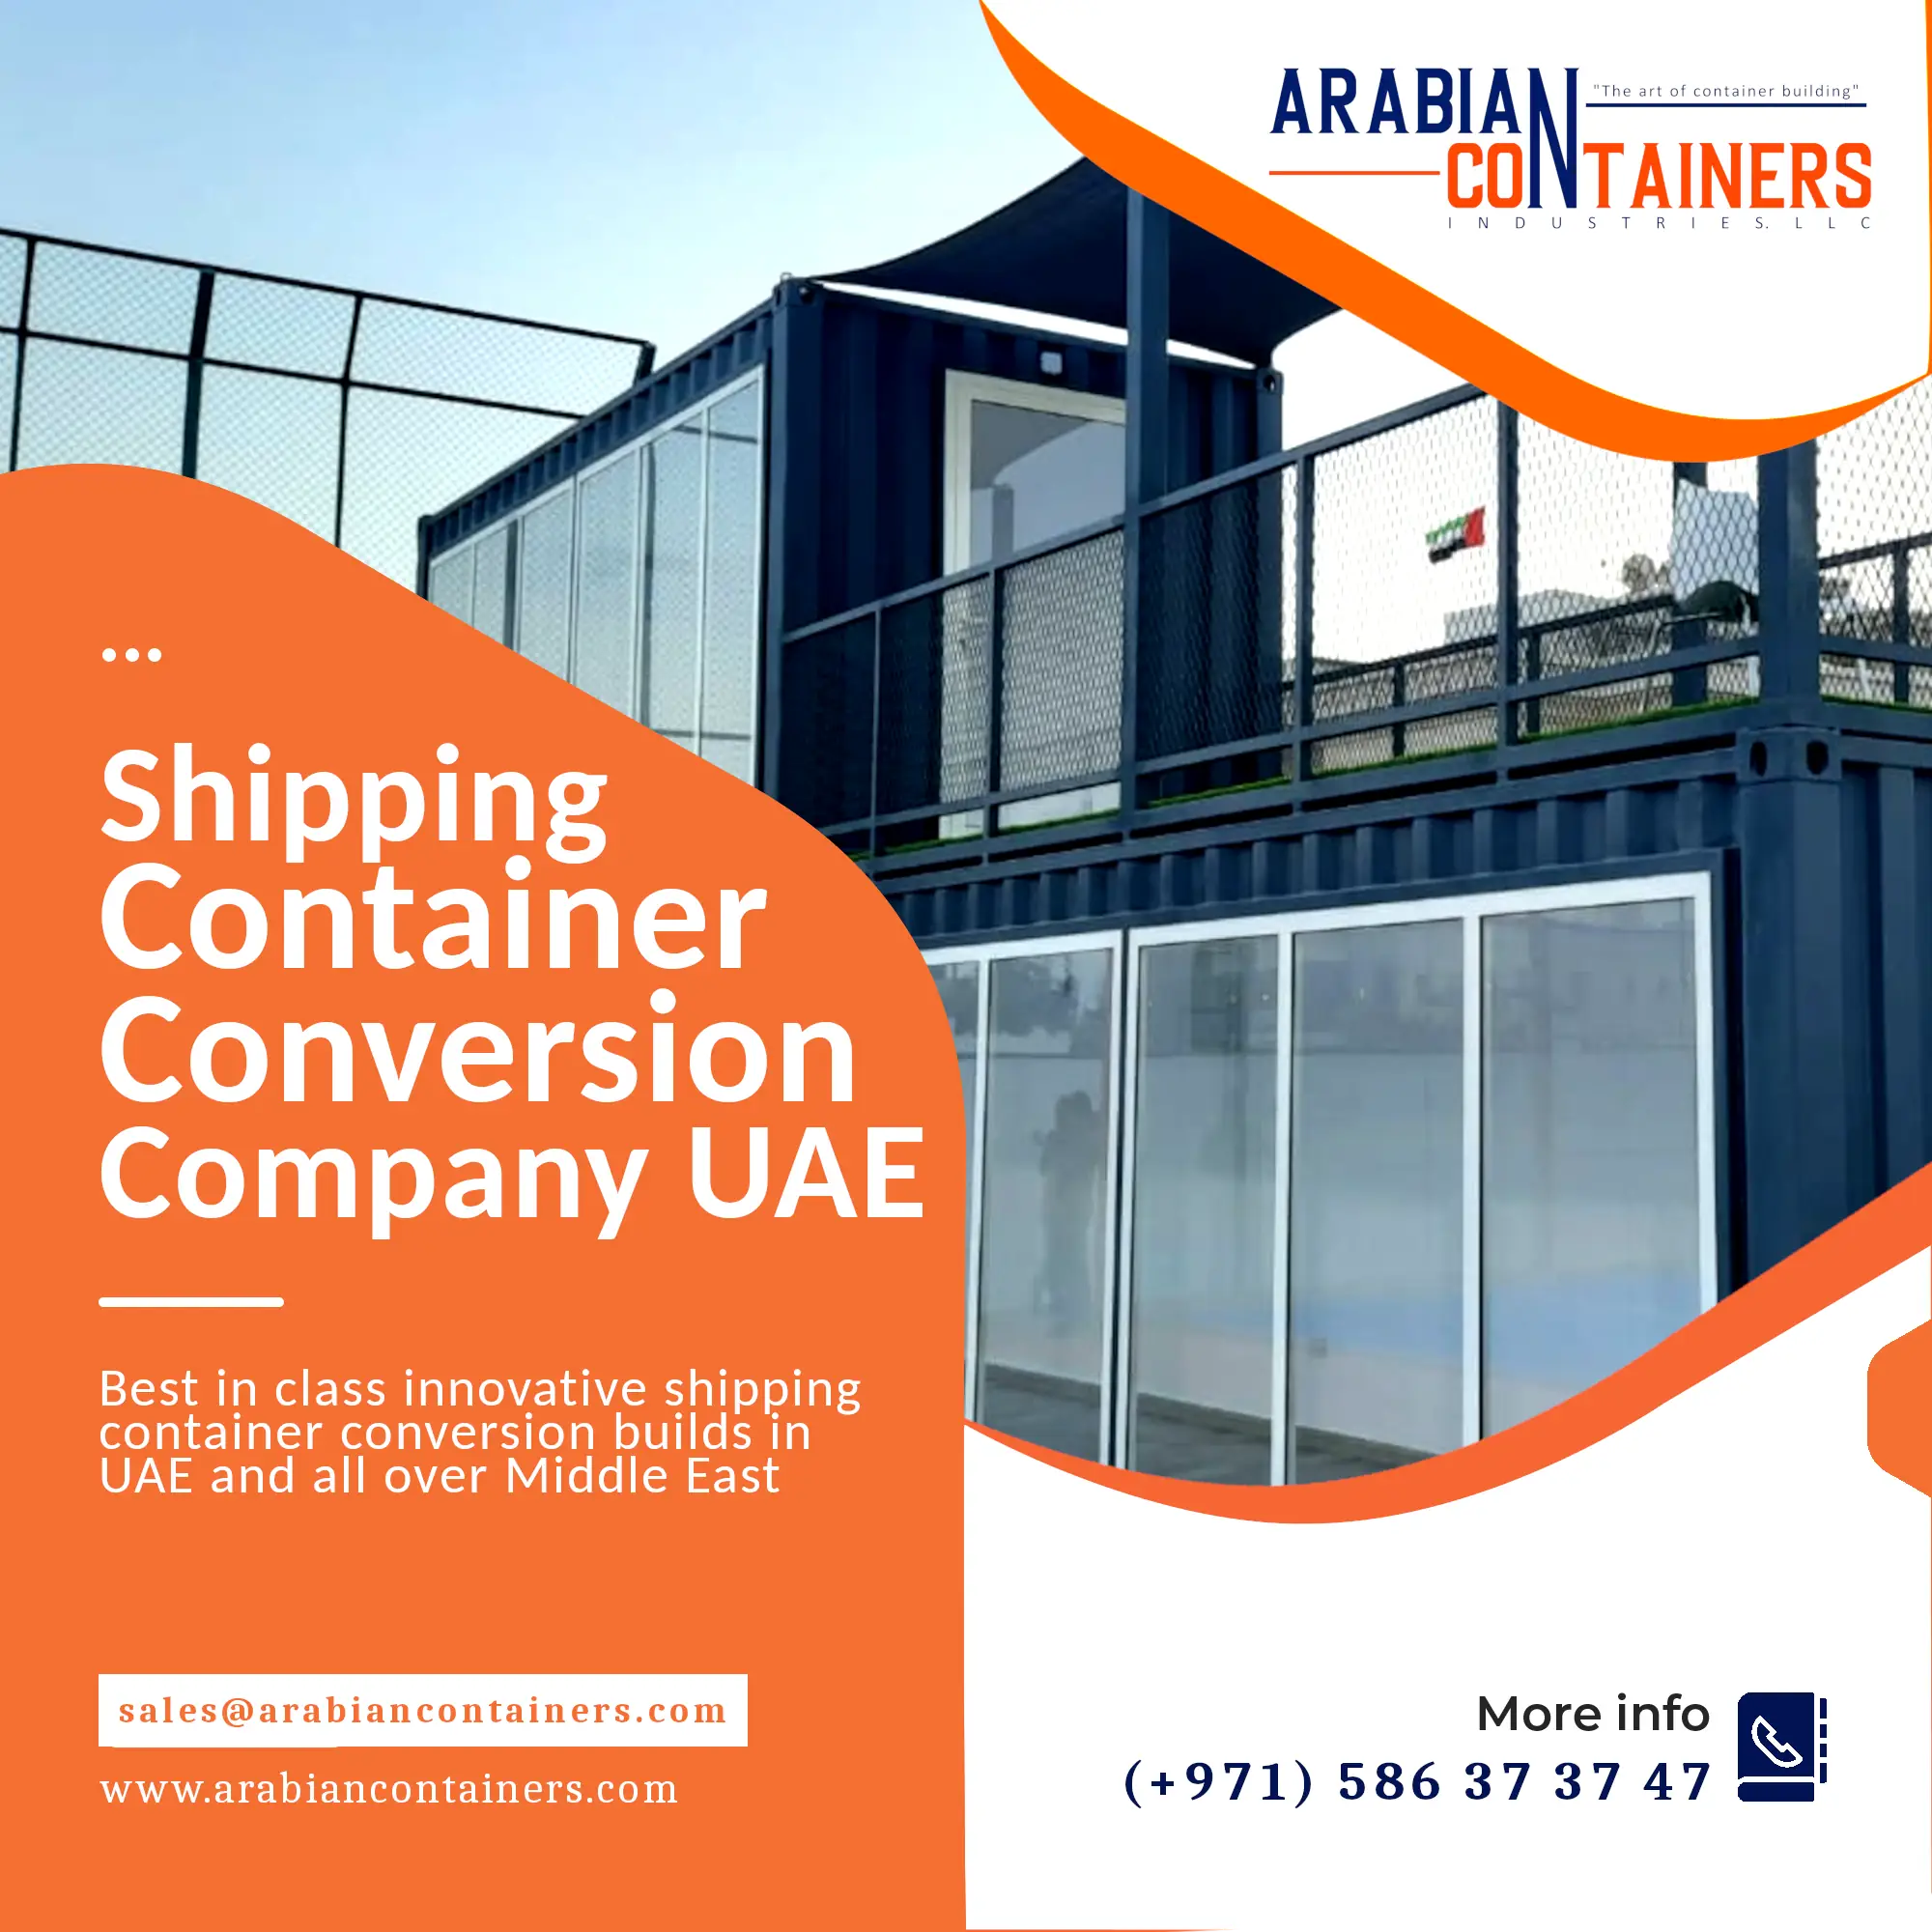 Arabian Containers: The Best Shipping Container Conversion Company in UAE